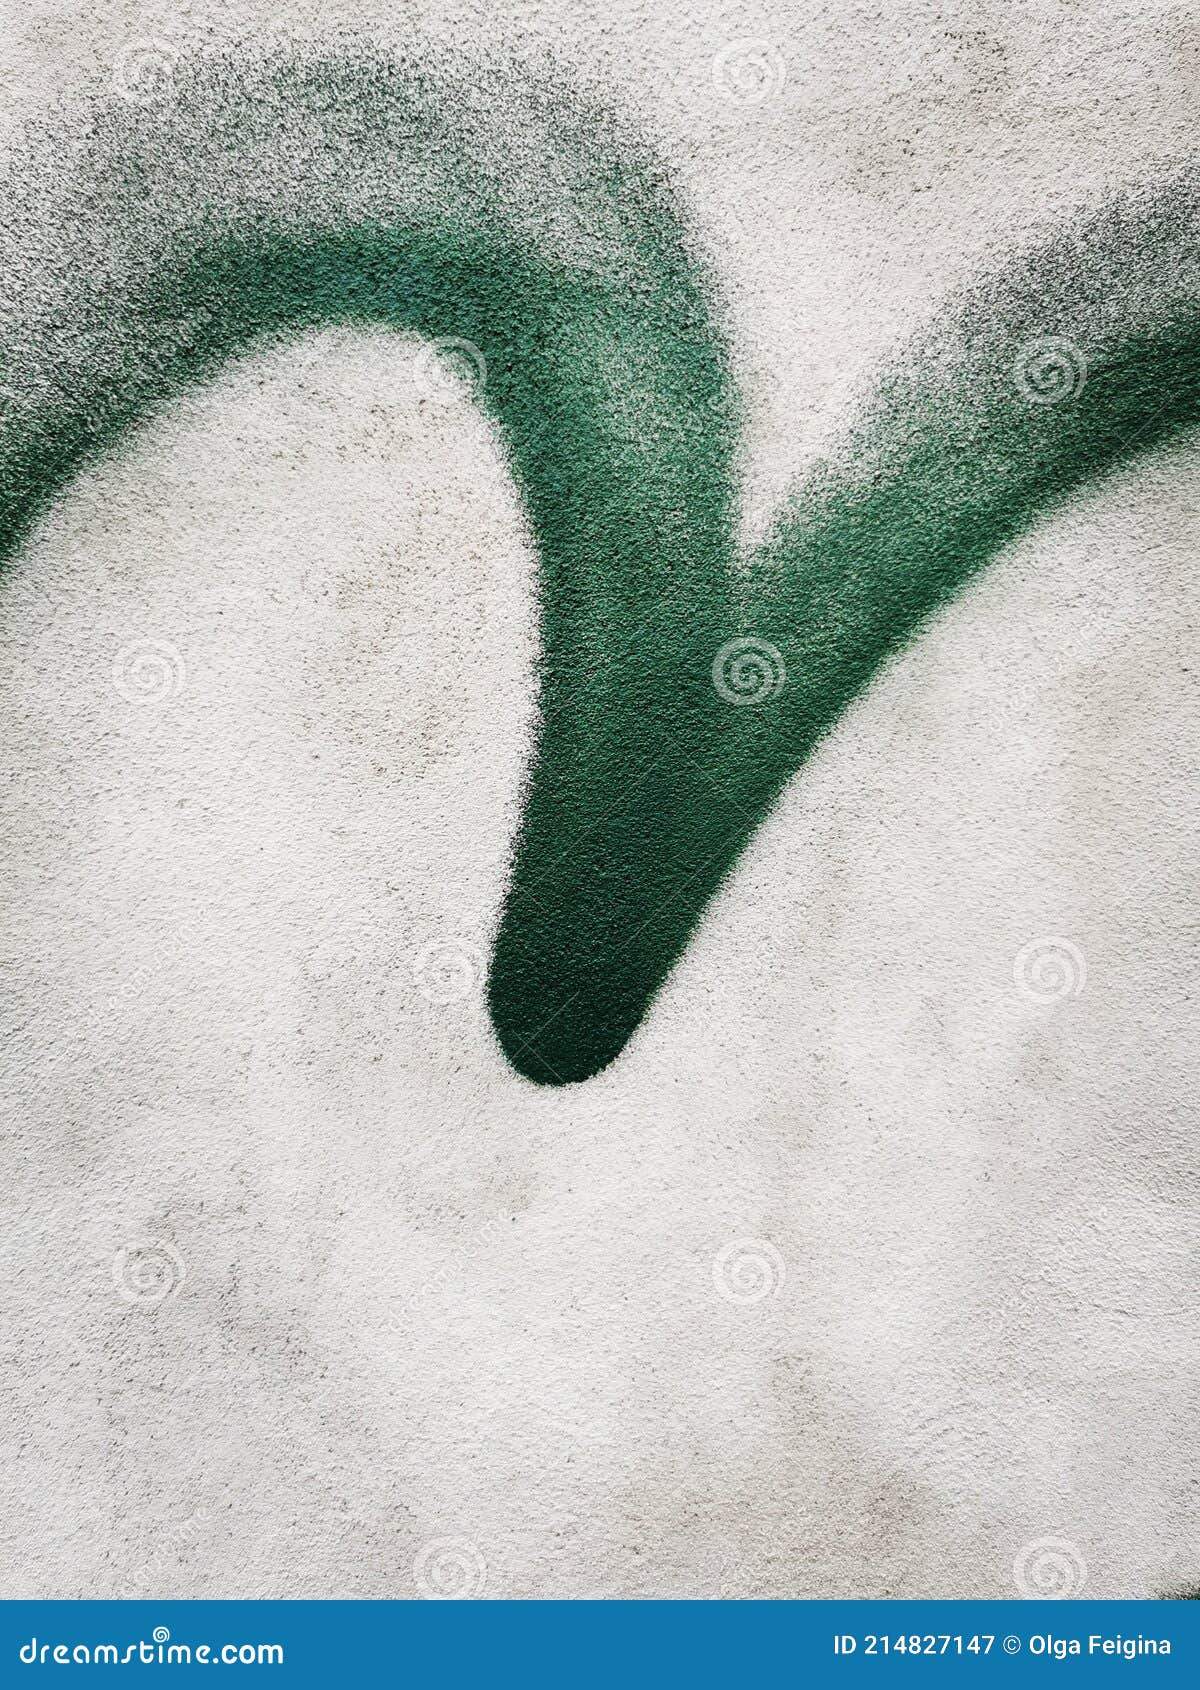 green emulsified check mark on concrete wall.